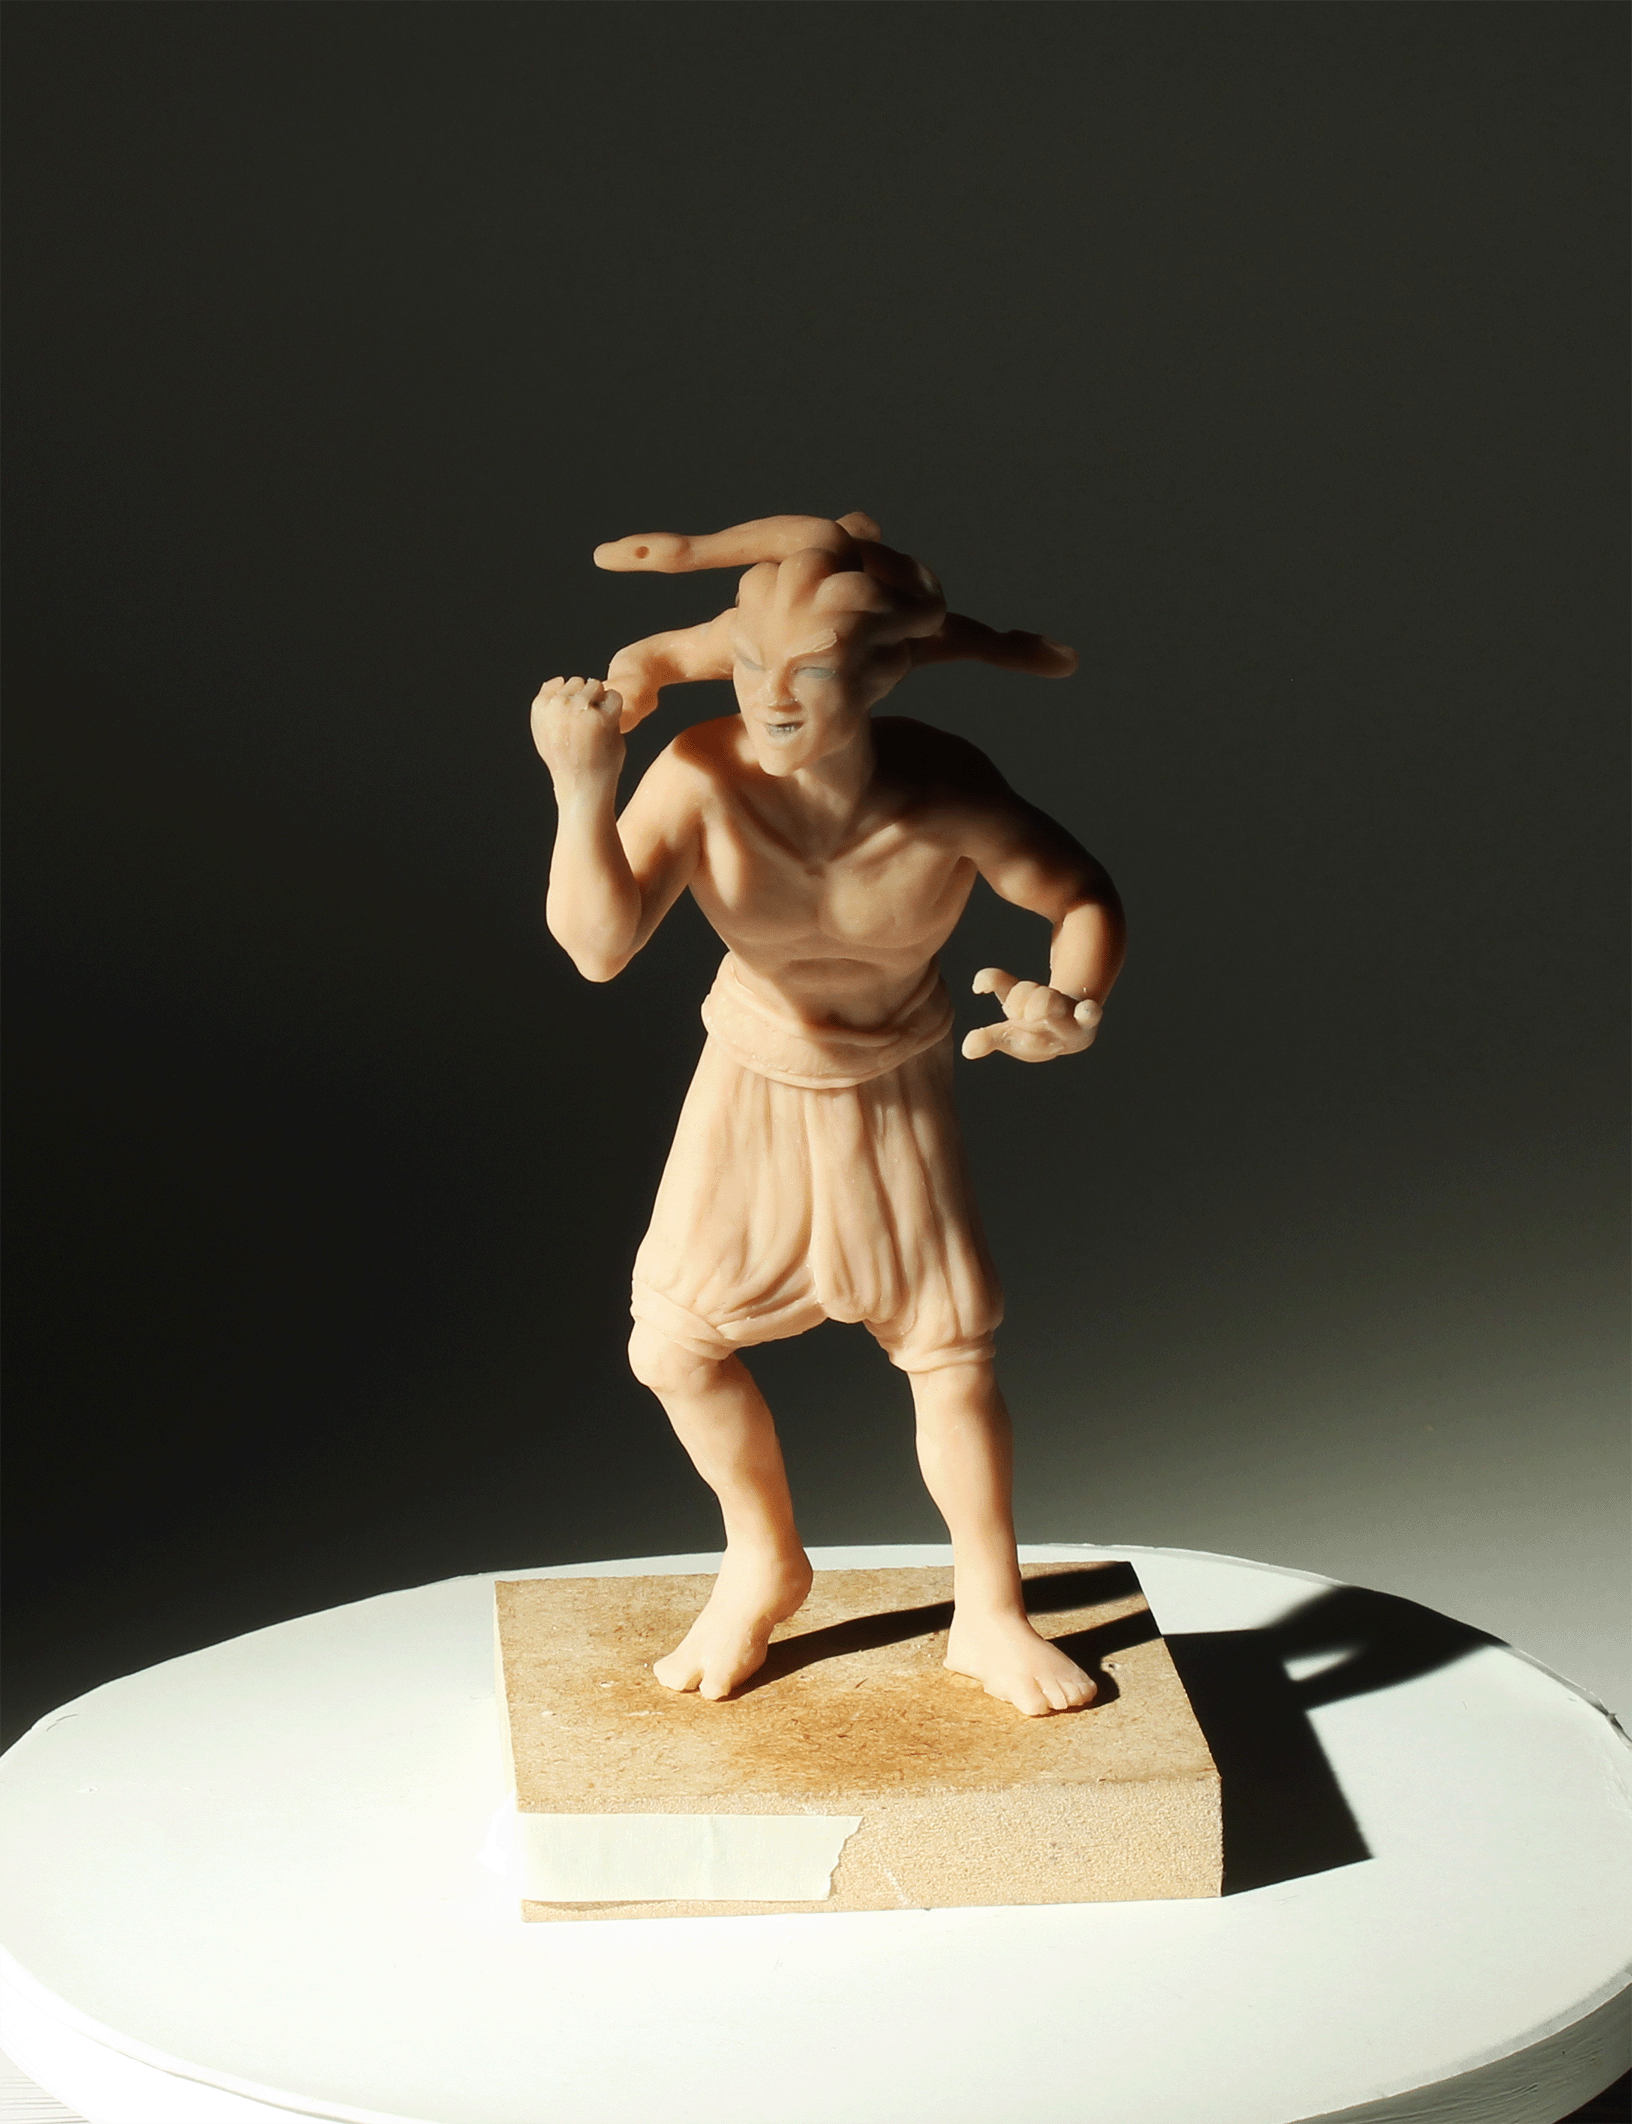 Maquette sculpture featuring a fantasy character by Lou Stephenson.